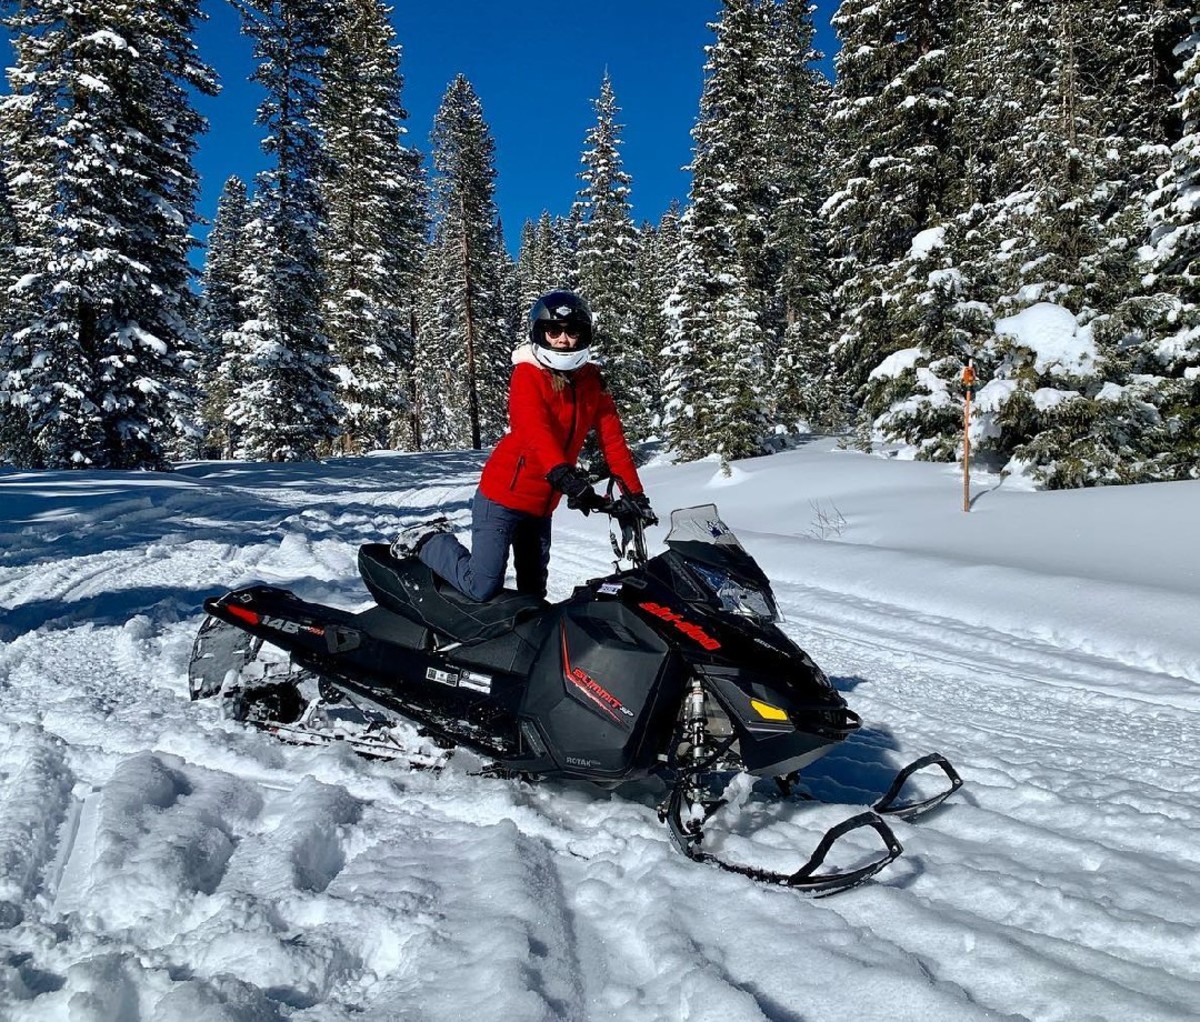 Woman on a snowmobile on snowy tracks in Grand Mesa National Forest, Colorado